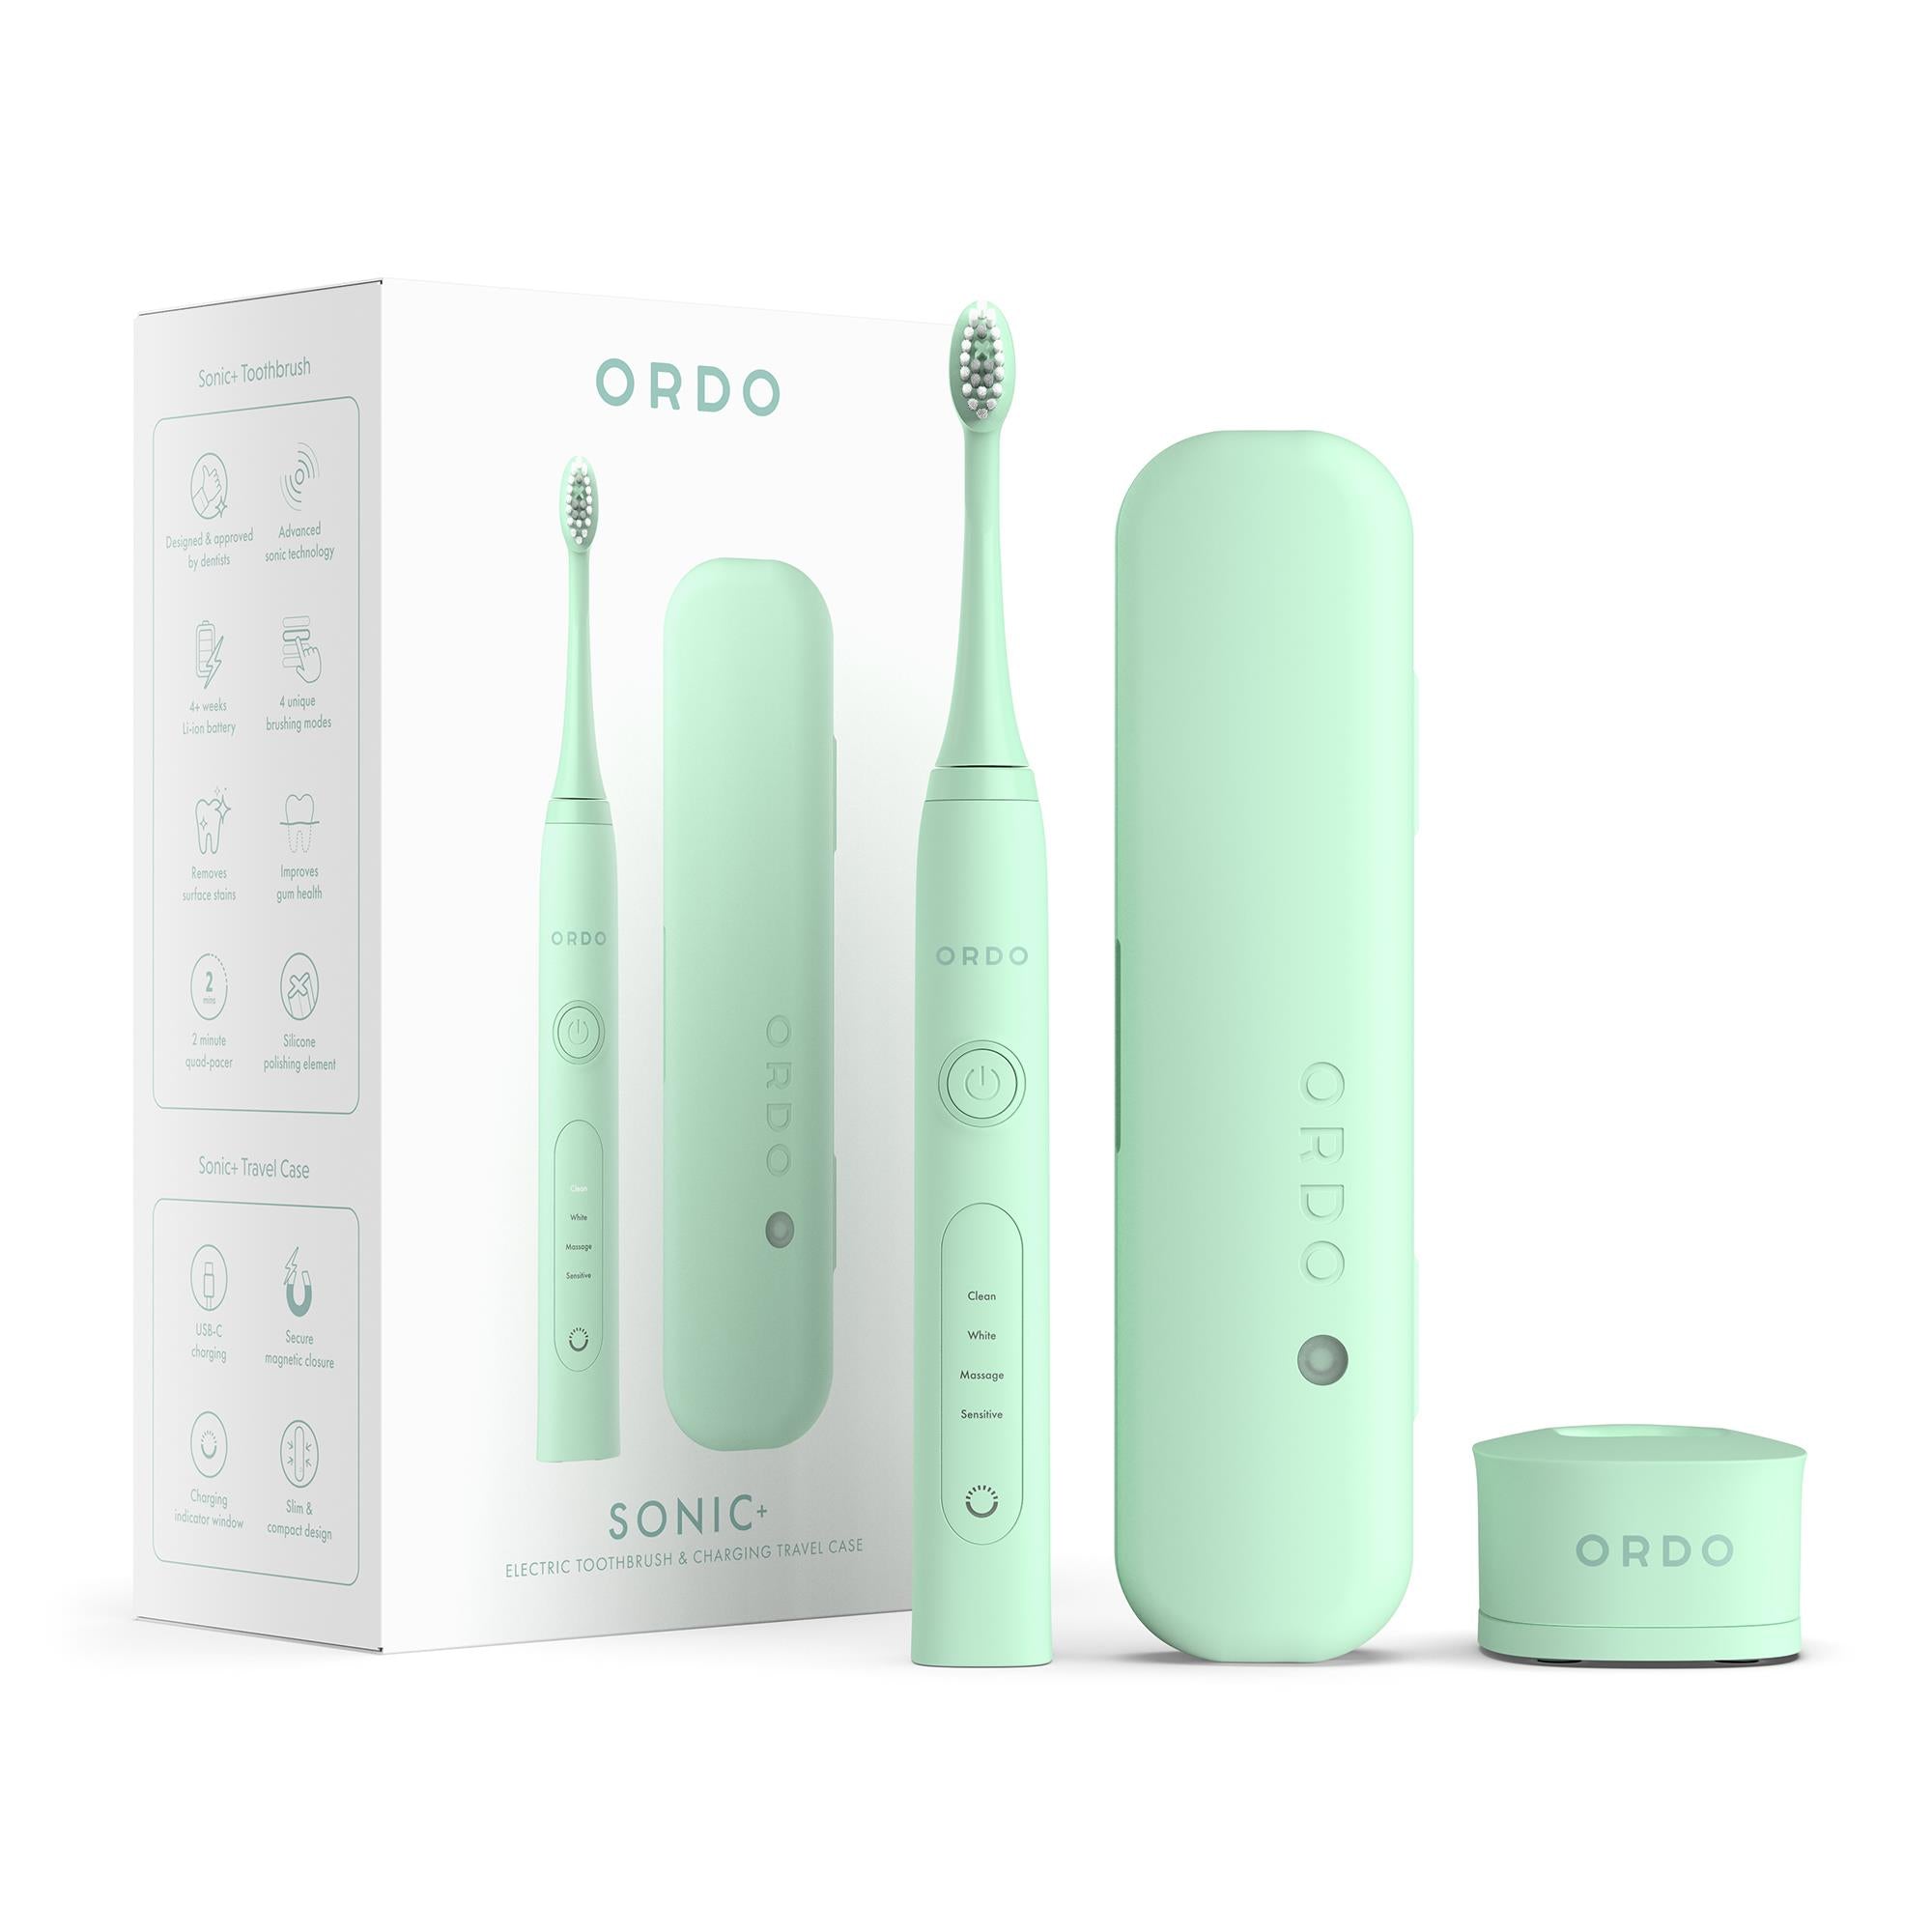 ordo sonic+ electric toothbrush & charging travel case bundle (mint green)